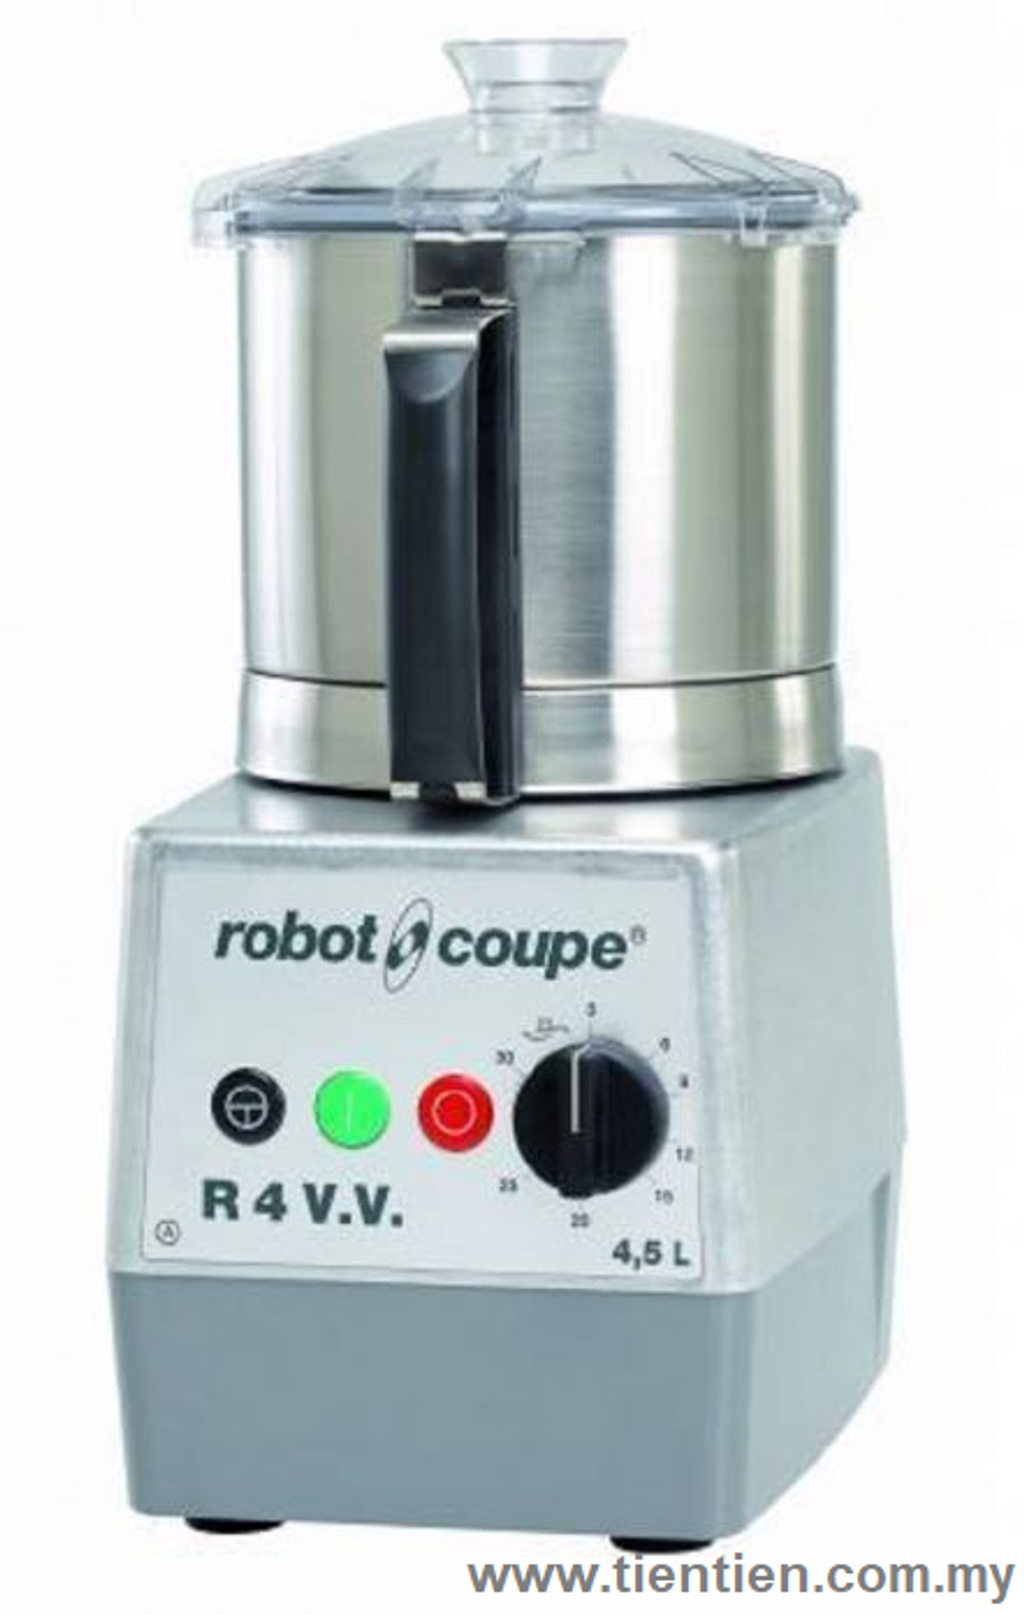 robot-coupe-4l-cutter-mixer-variable-speed-r4vv-tientien-malaysia.png